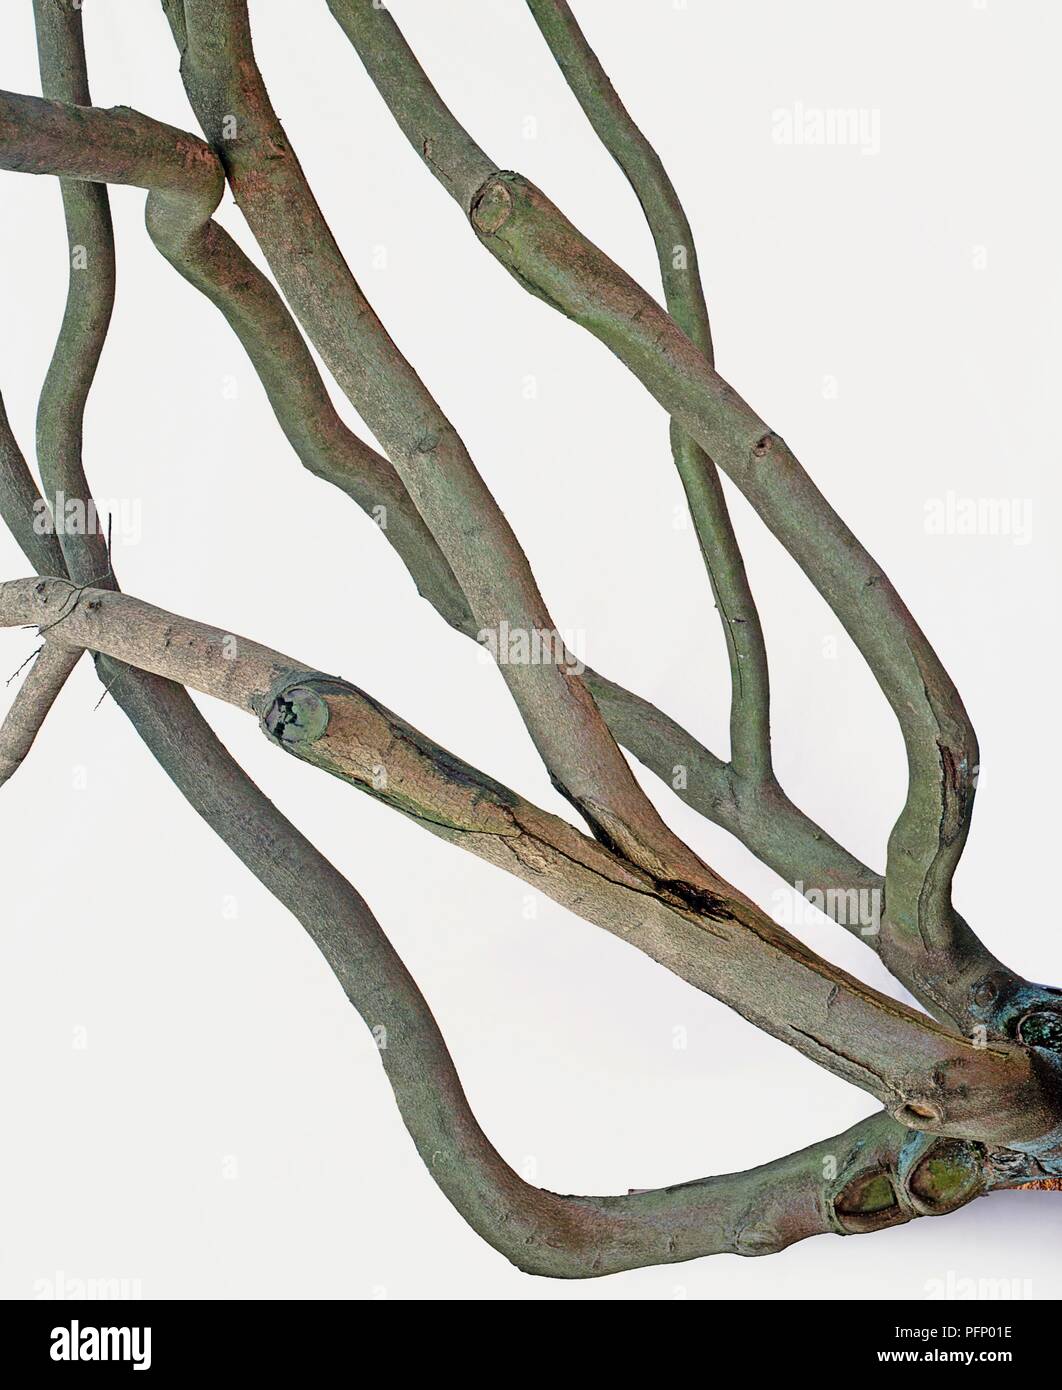 Crossing branches of a hamamelis shrub, one branch taking the weight of another, causing a split to develop on the main trunk Stock Photo